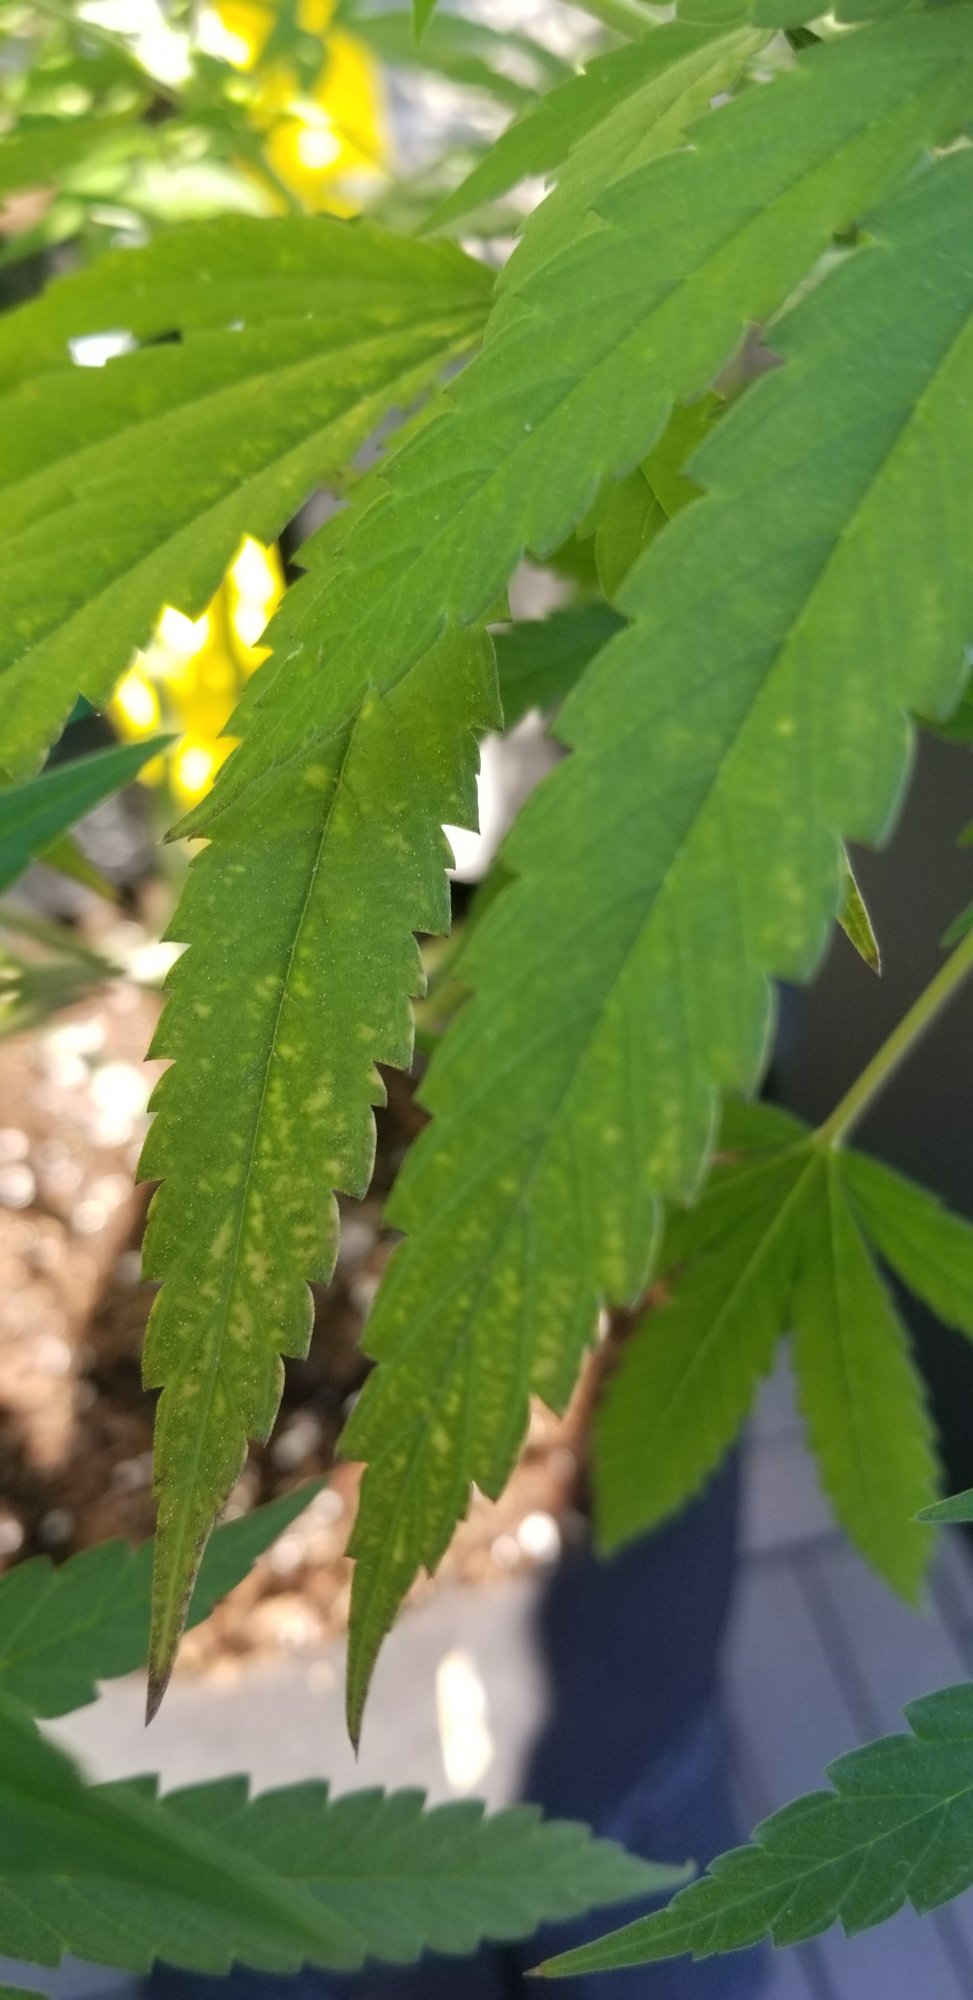 Any idea if this happening to my leaves because of a deficiency or pest 3